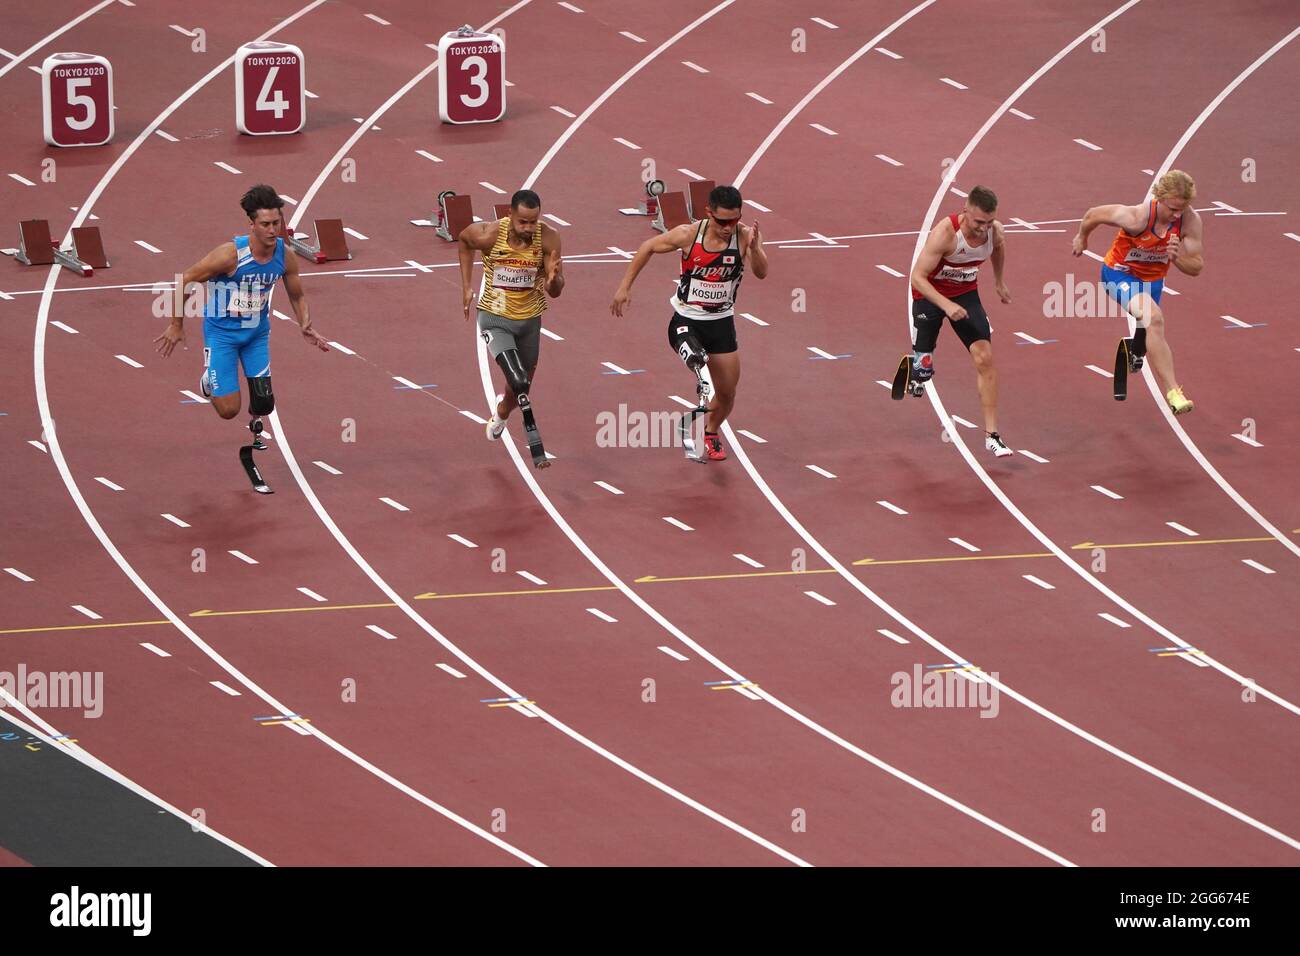 Tokio, Japan. 29th Aug, 2021. Paralympics: Athletics, men's 100m, 1st round, 2nd group, at Olympic Stadium. Alessandro Assola from Italy (l-r), Leon Schäfer from Germany, Junta Kosuda from Japan, Daniel Wagner from Denmark and Joel de Job from the Netherlands start into the preliminary round. Credit: Marcus Brandt/dpa/Alamy Live News Stock Photo